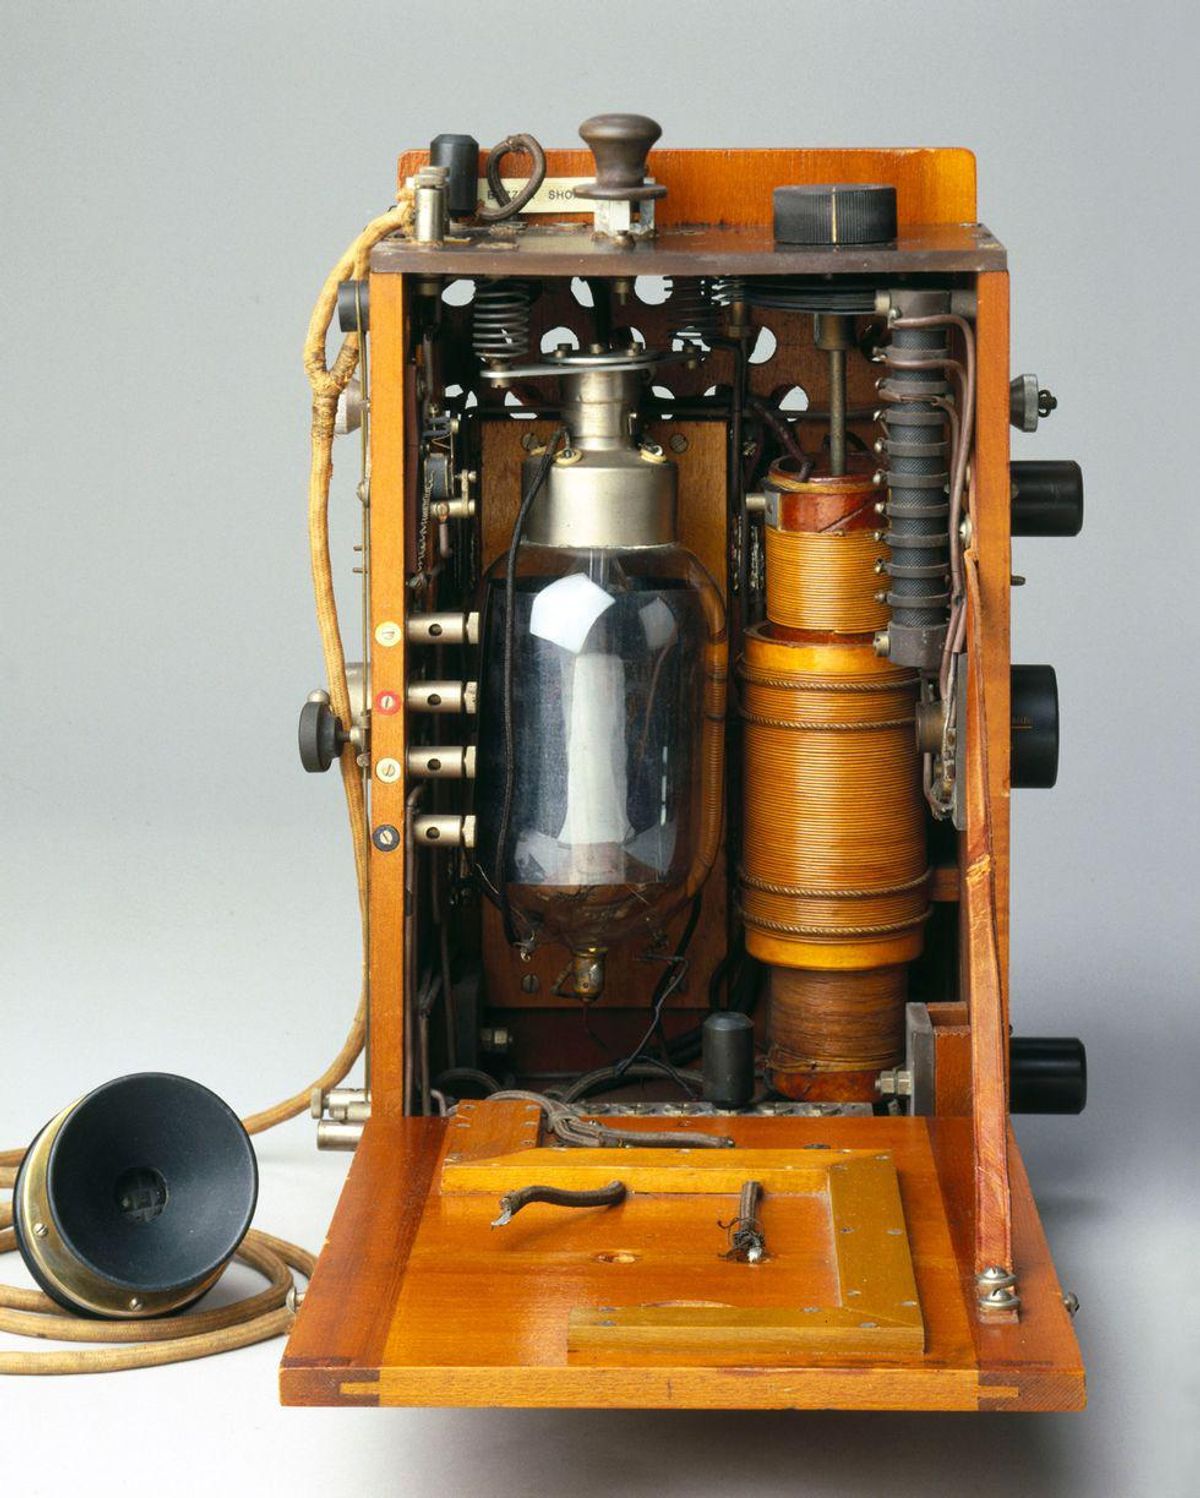 A radio telephony transmitter for use with aircraft, with a round valve and microphone. 